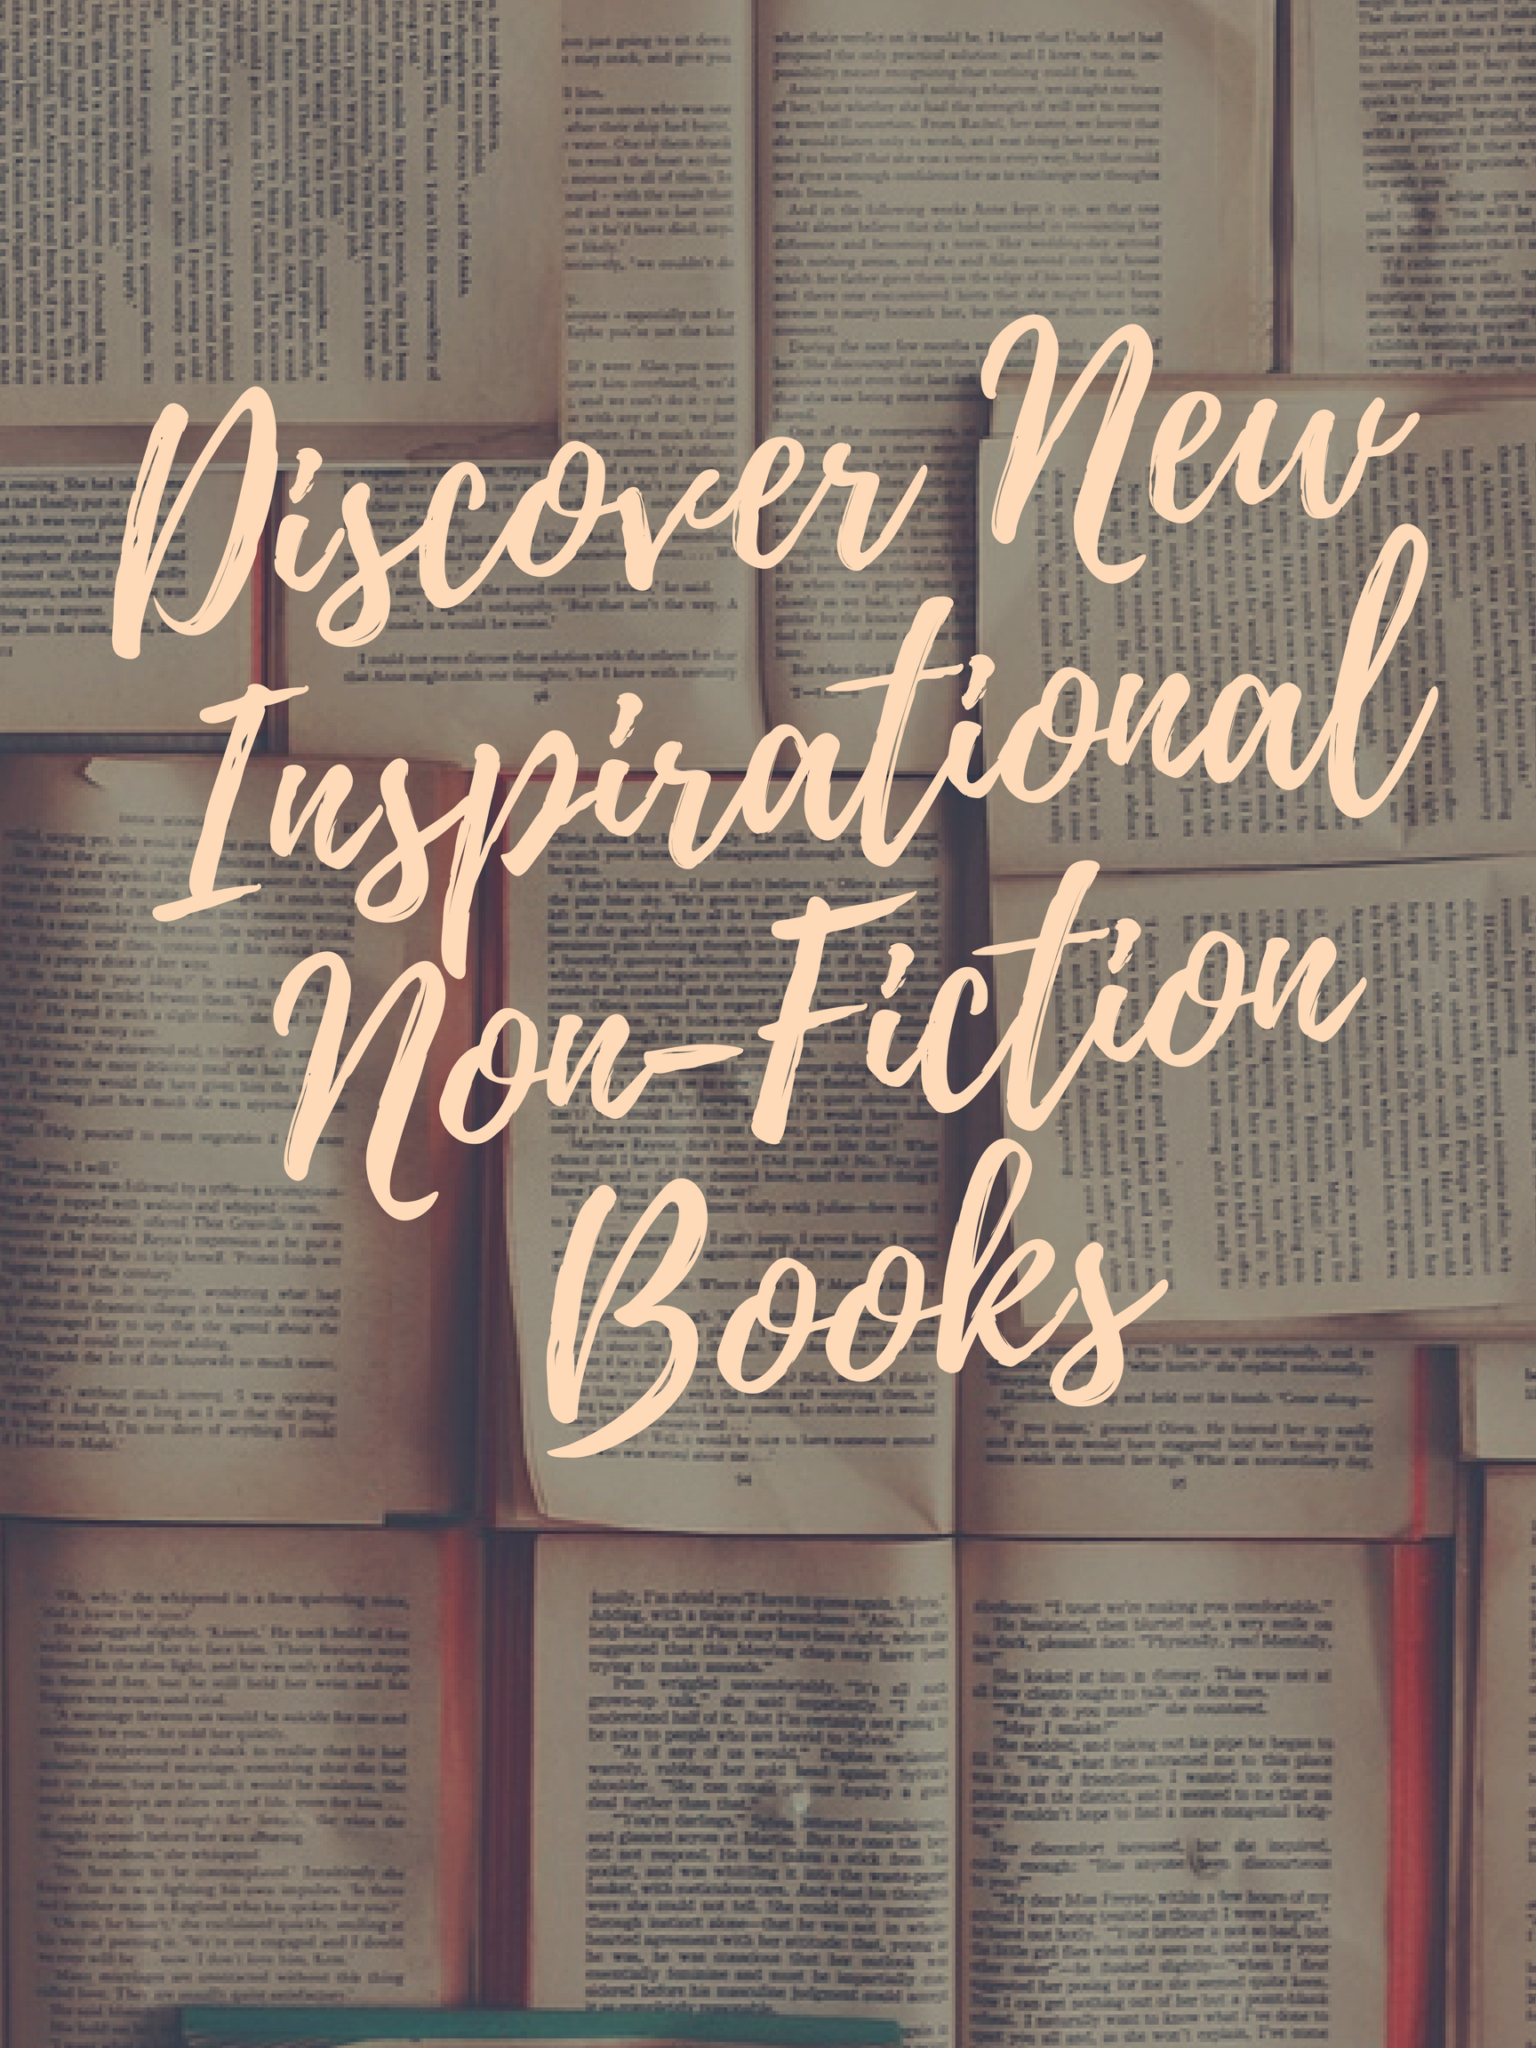 Discover New Inspirational Non-Fiction Books!